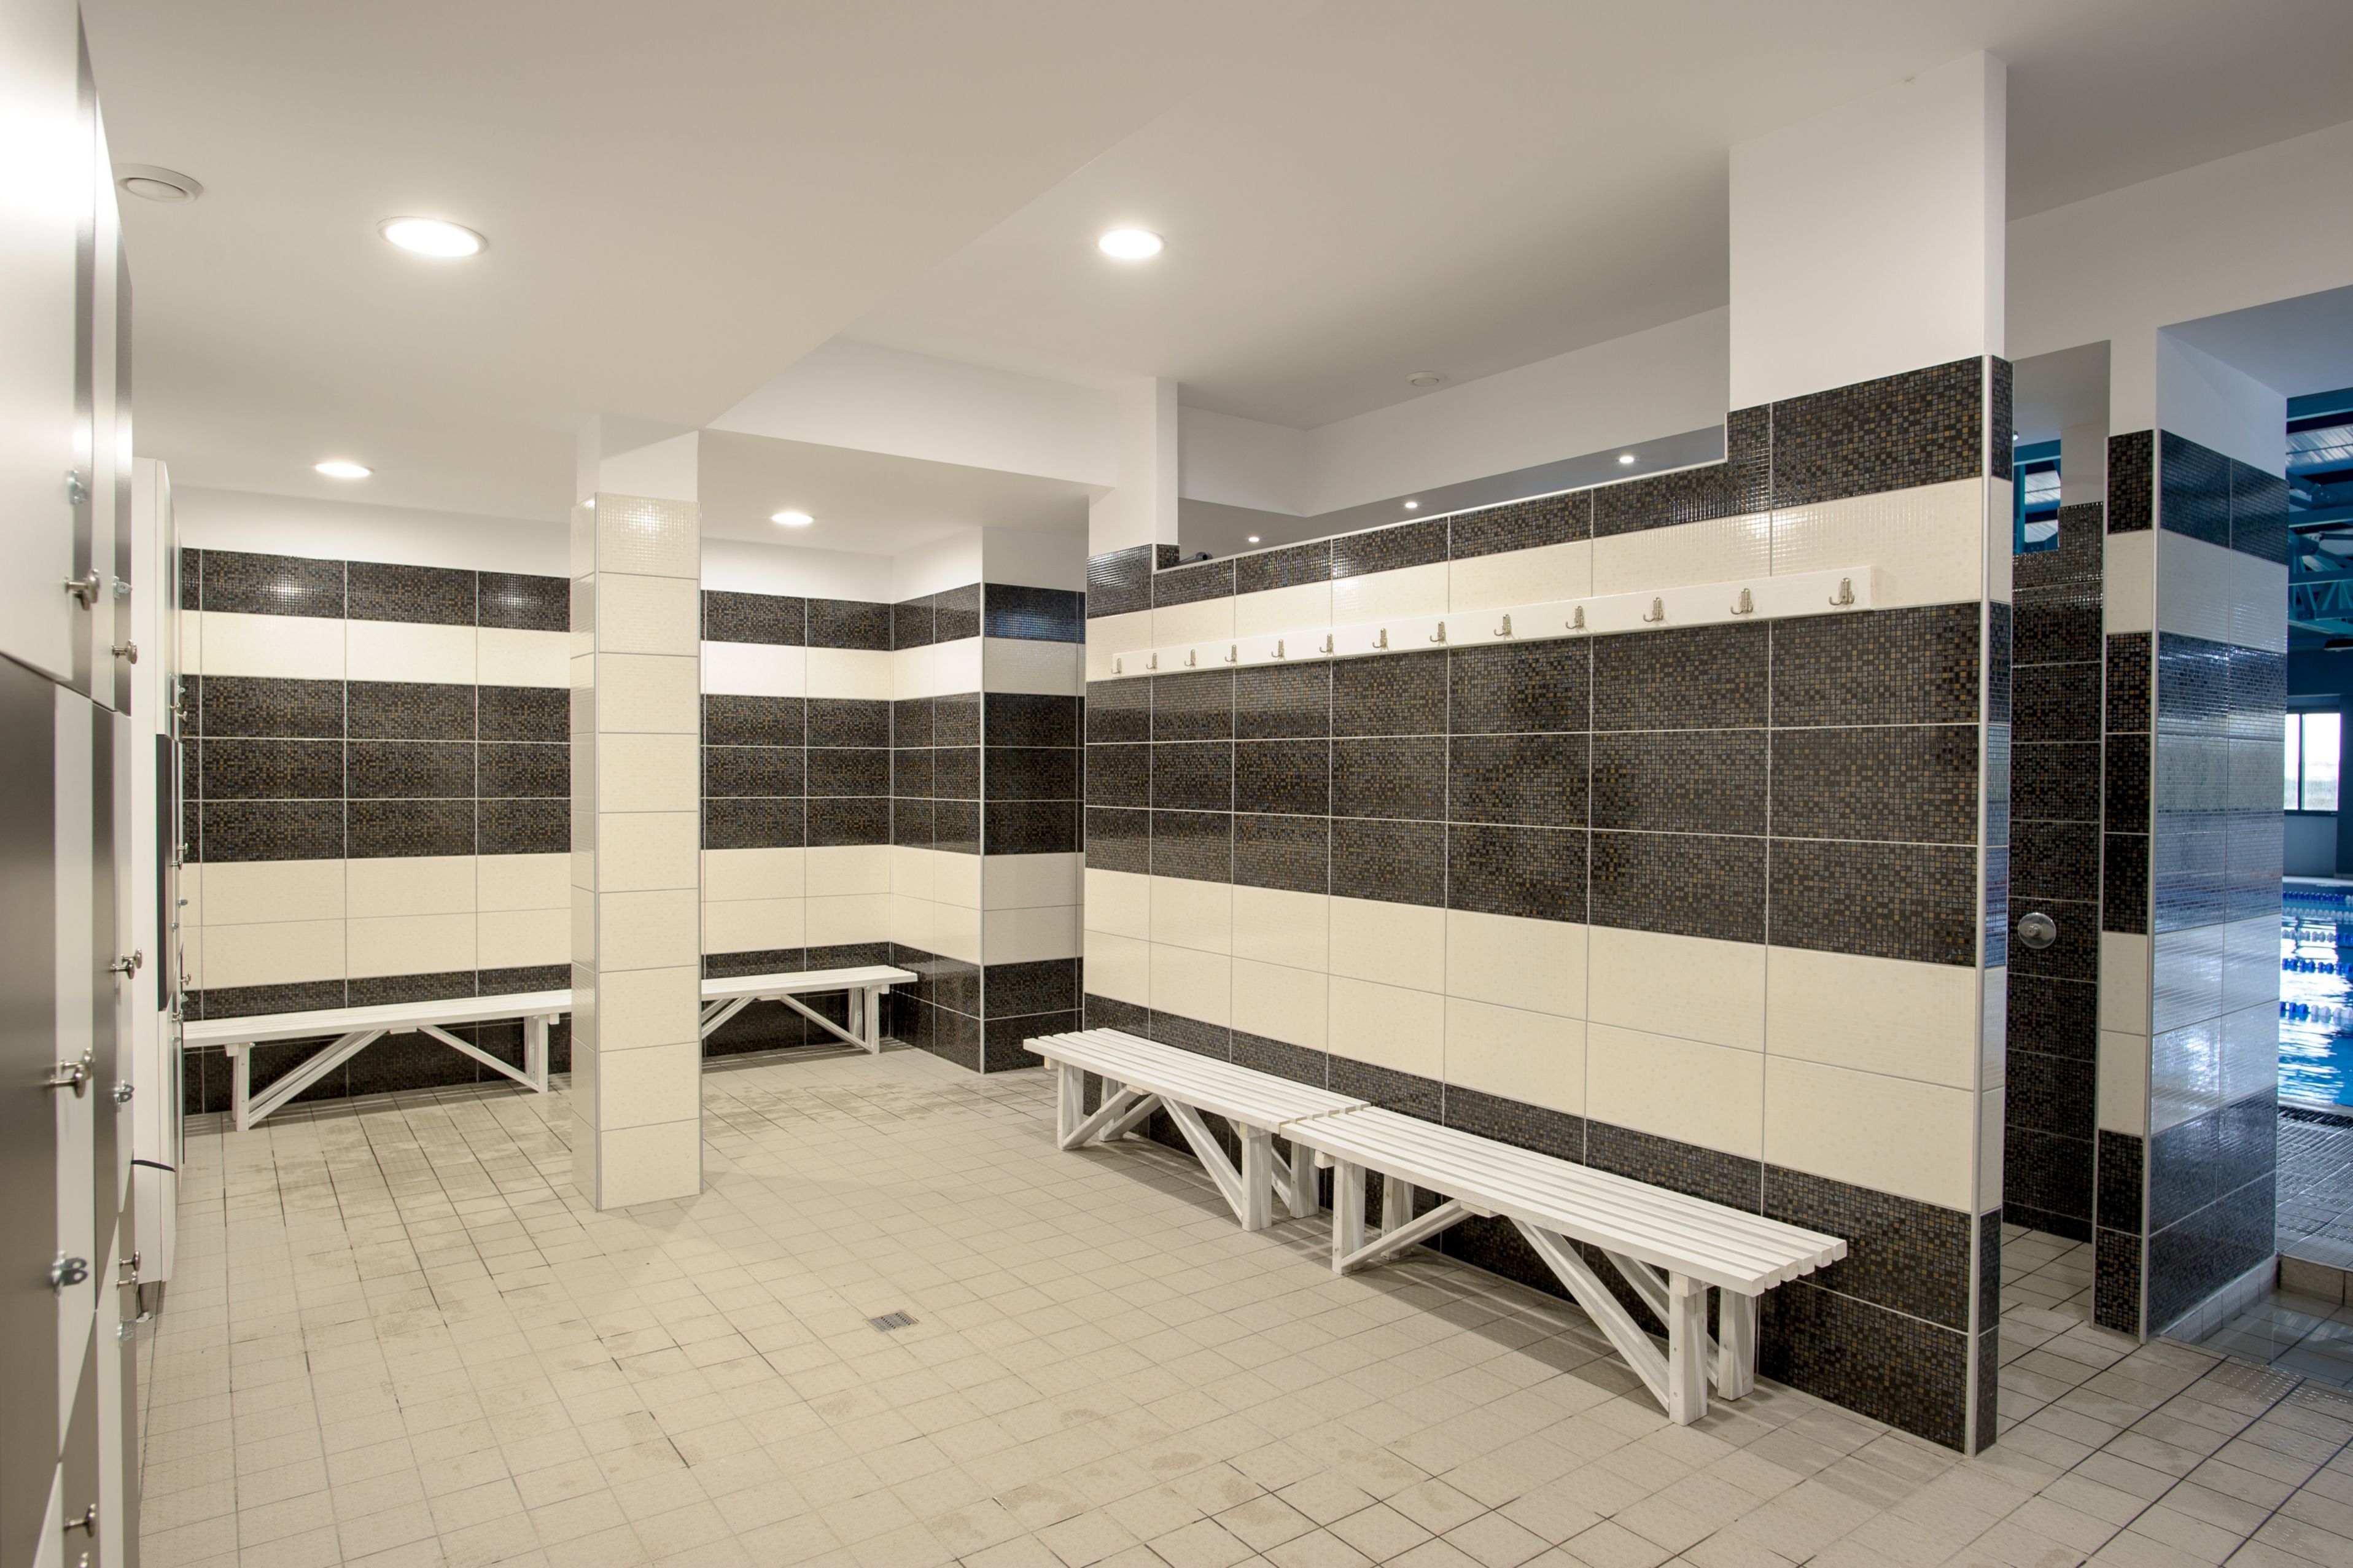 The bathroom of the Epirus Sport and Health Center in Ioannina, Greece